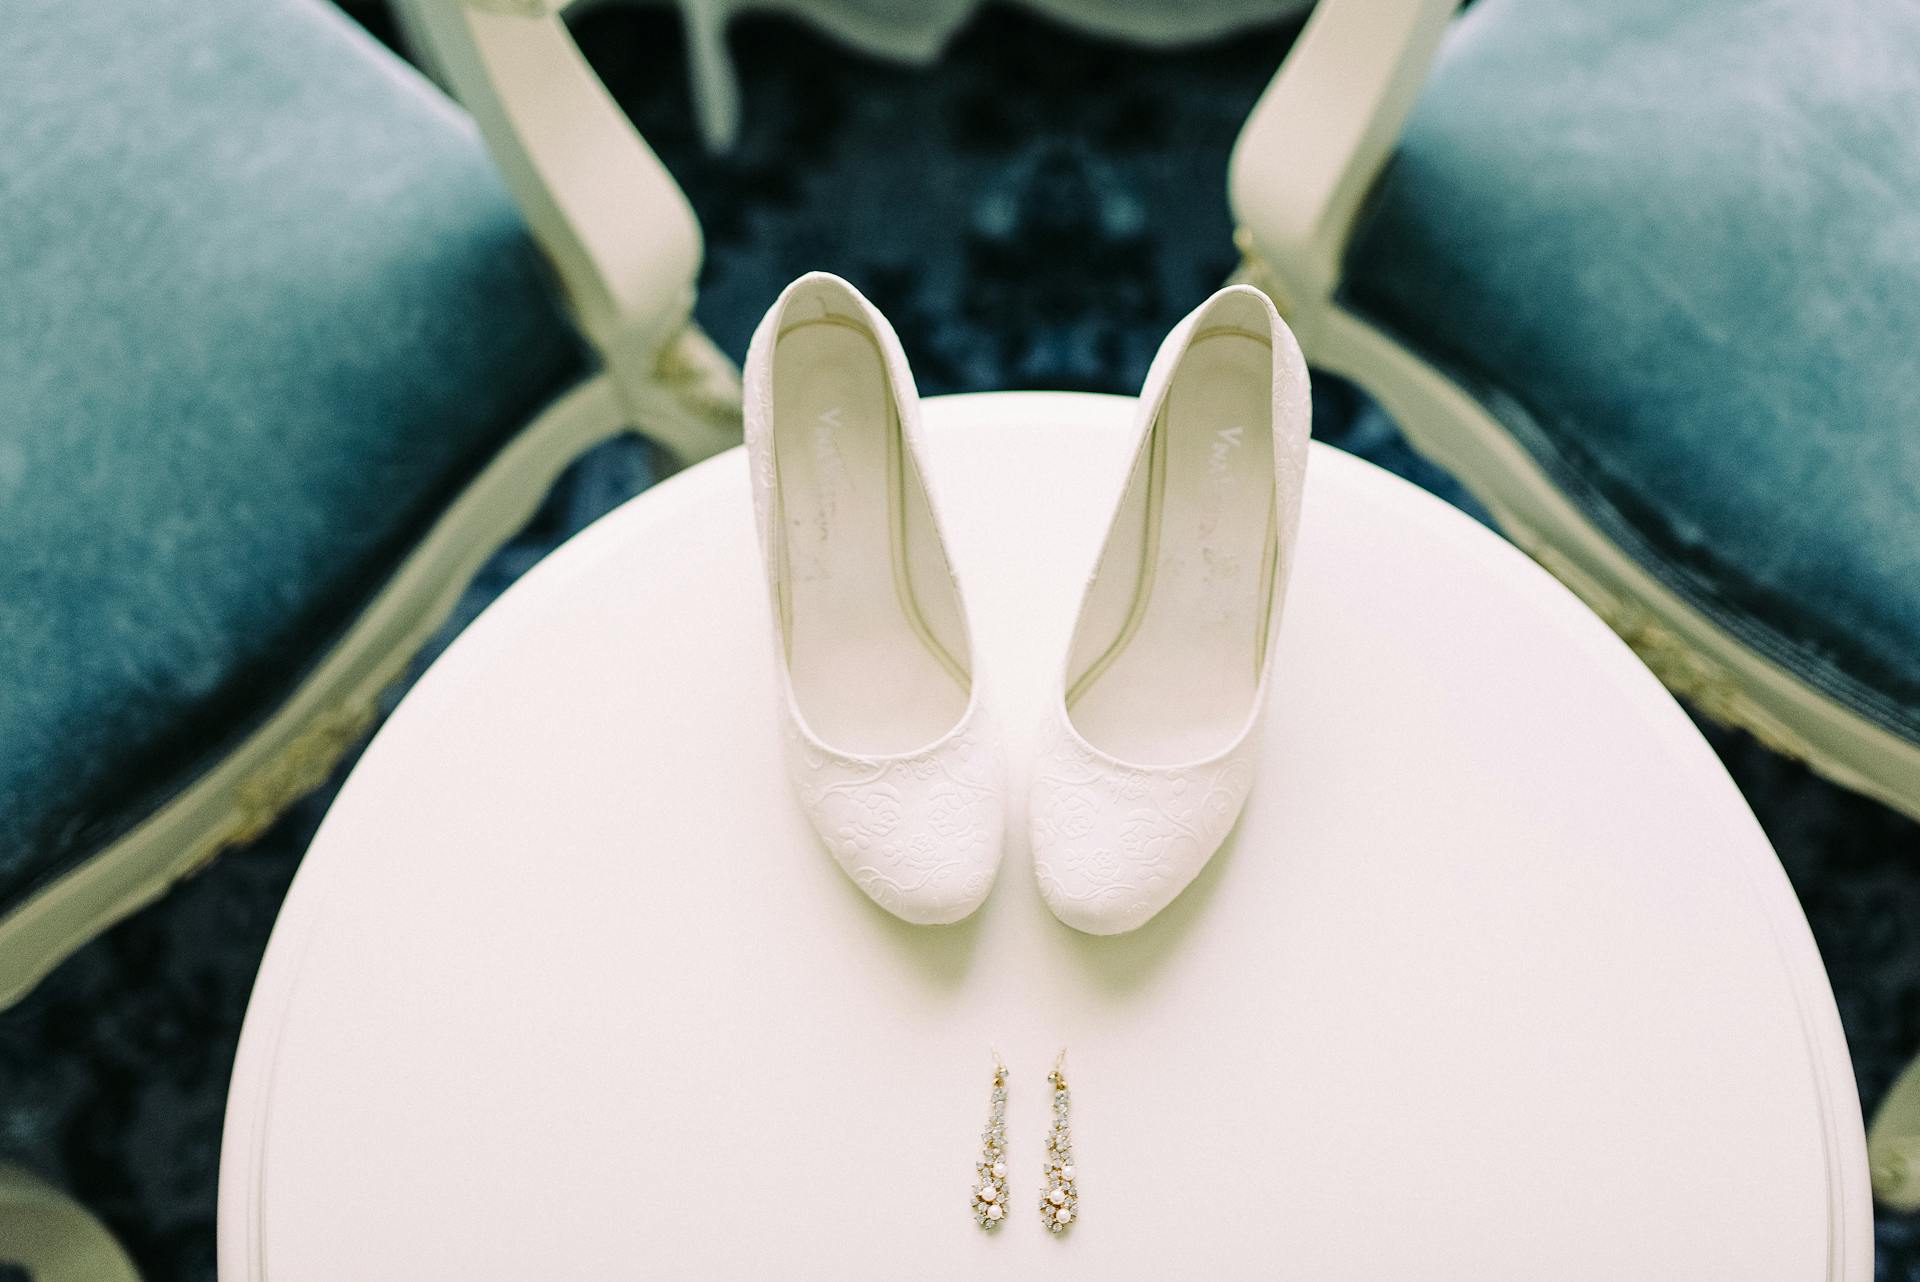 A pair of bridal shoes and earrings | Source: Pexels